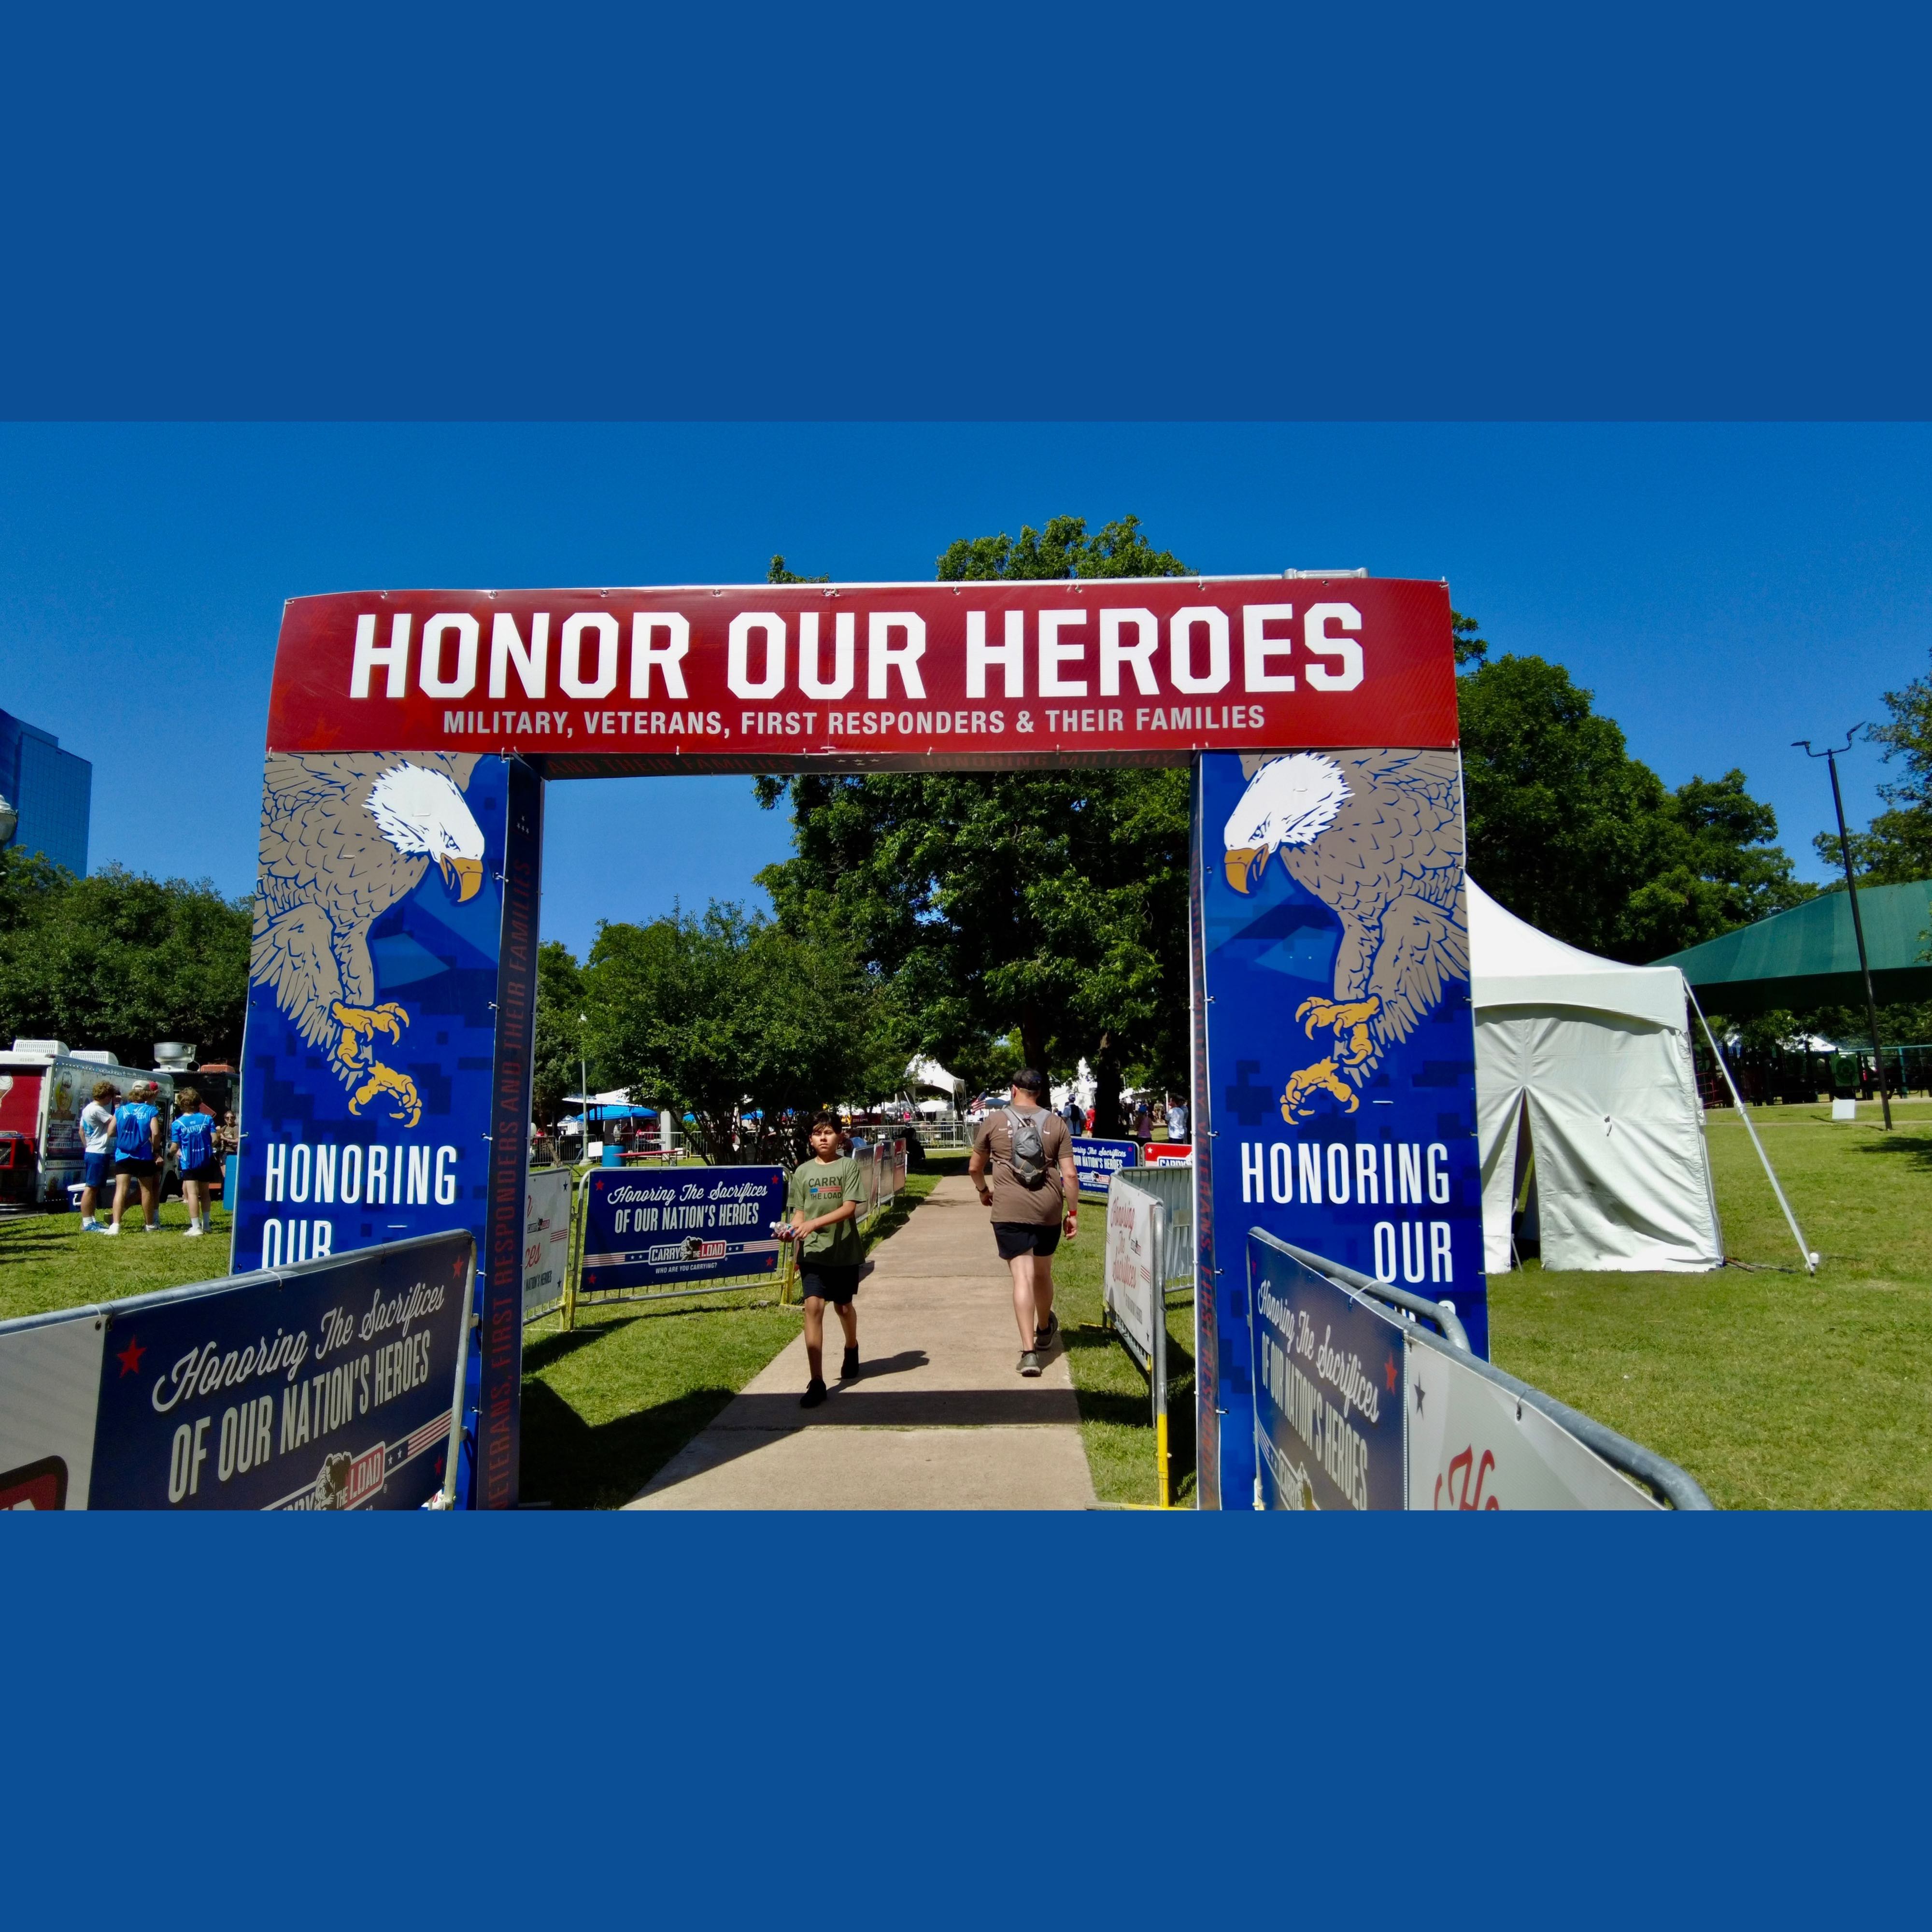 Frontline Healing Foundation is honored to be a Carry The Load non-profit partner for their 2023 Memorial May events to restore the true meaning of Memorial Day – for the sixth year.